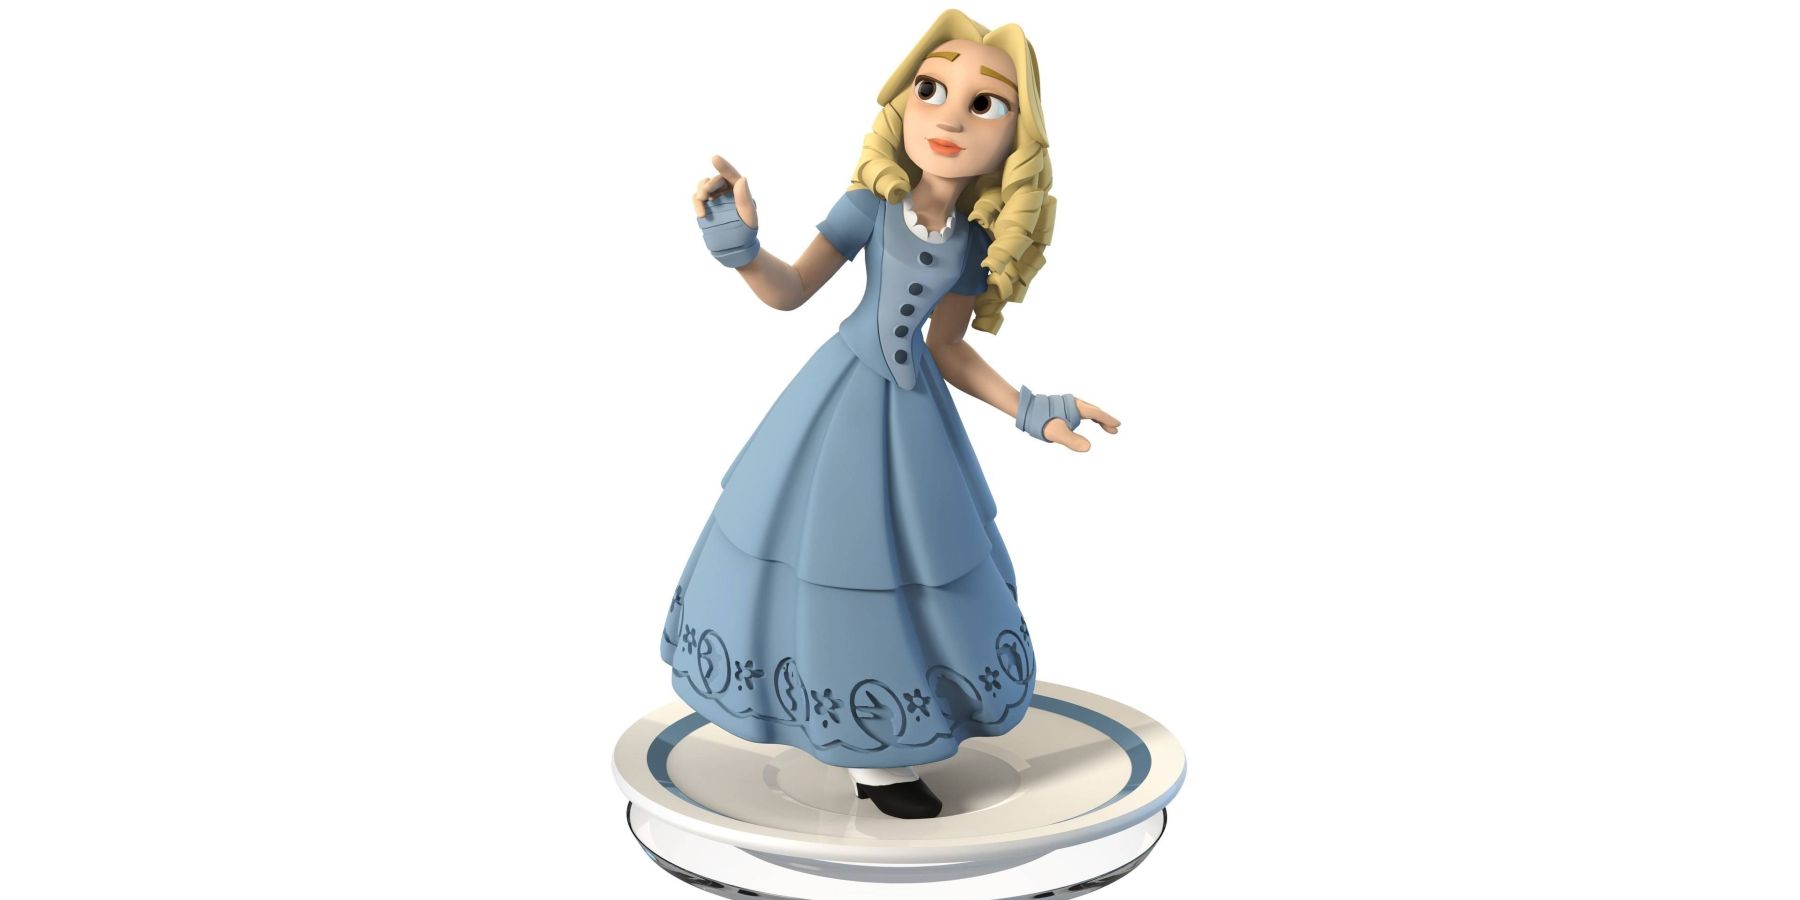 Official render for the Alice figure for Disney Infinity